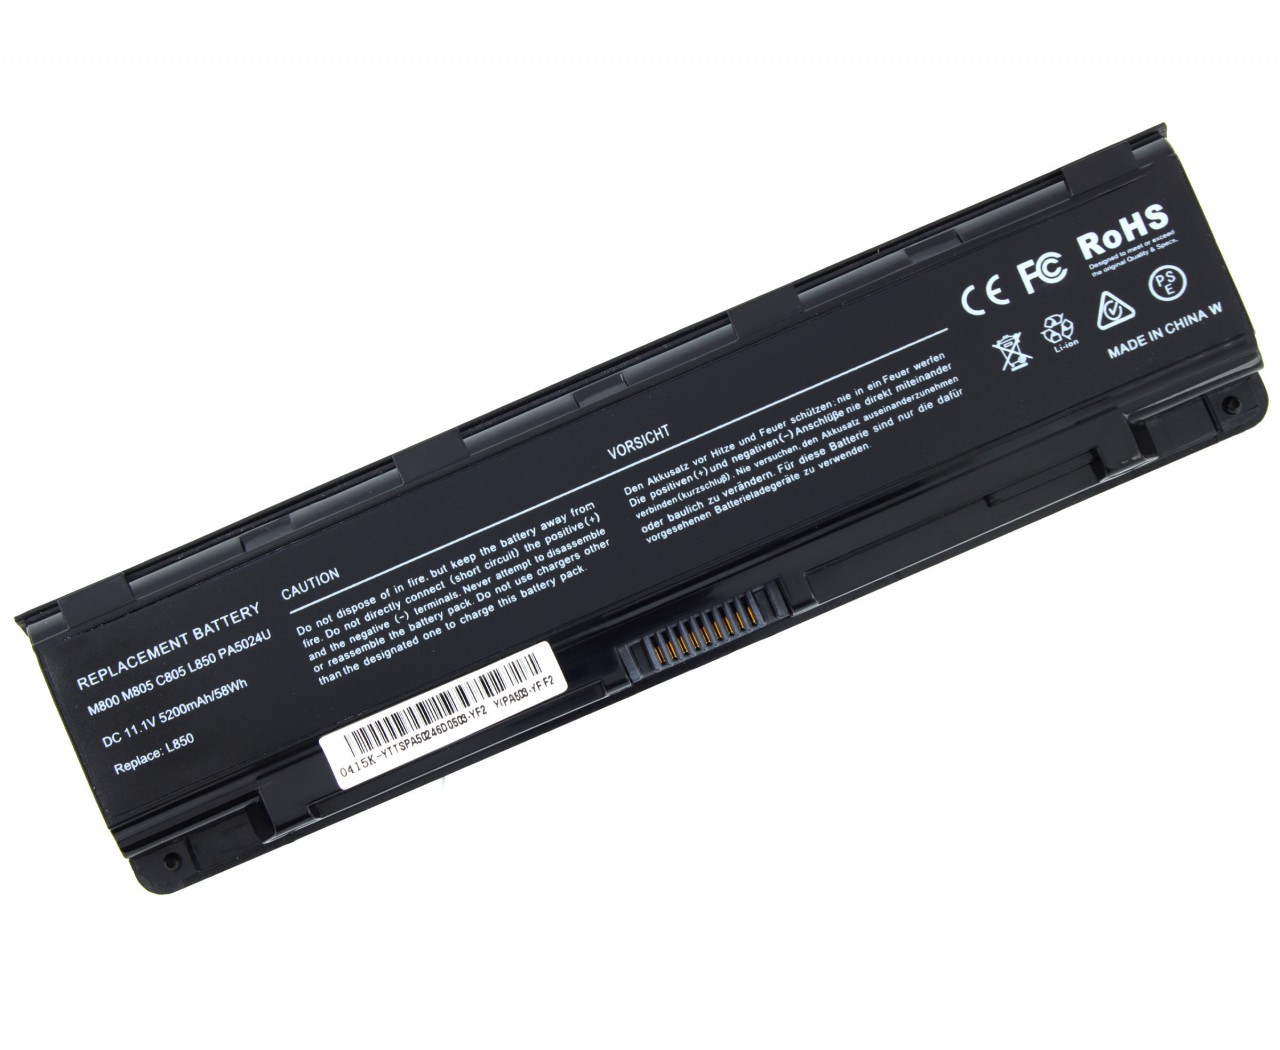 Baterie Toshiba Satellite C55DT A 58 Wh / 5200 mAh